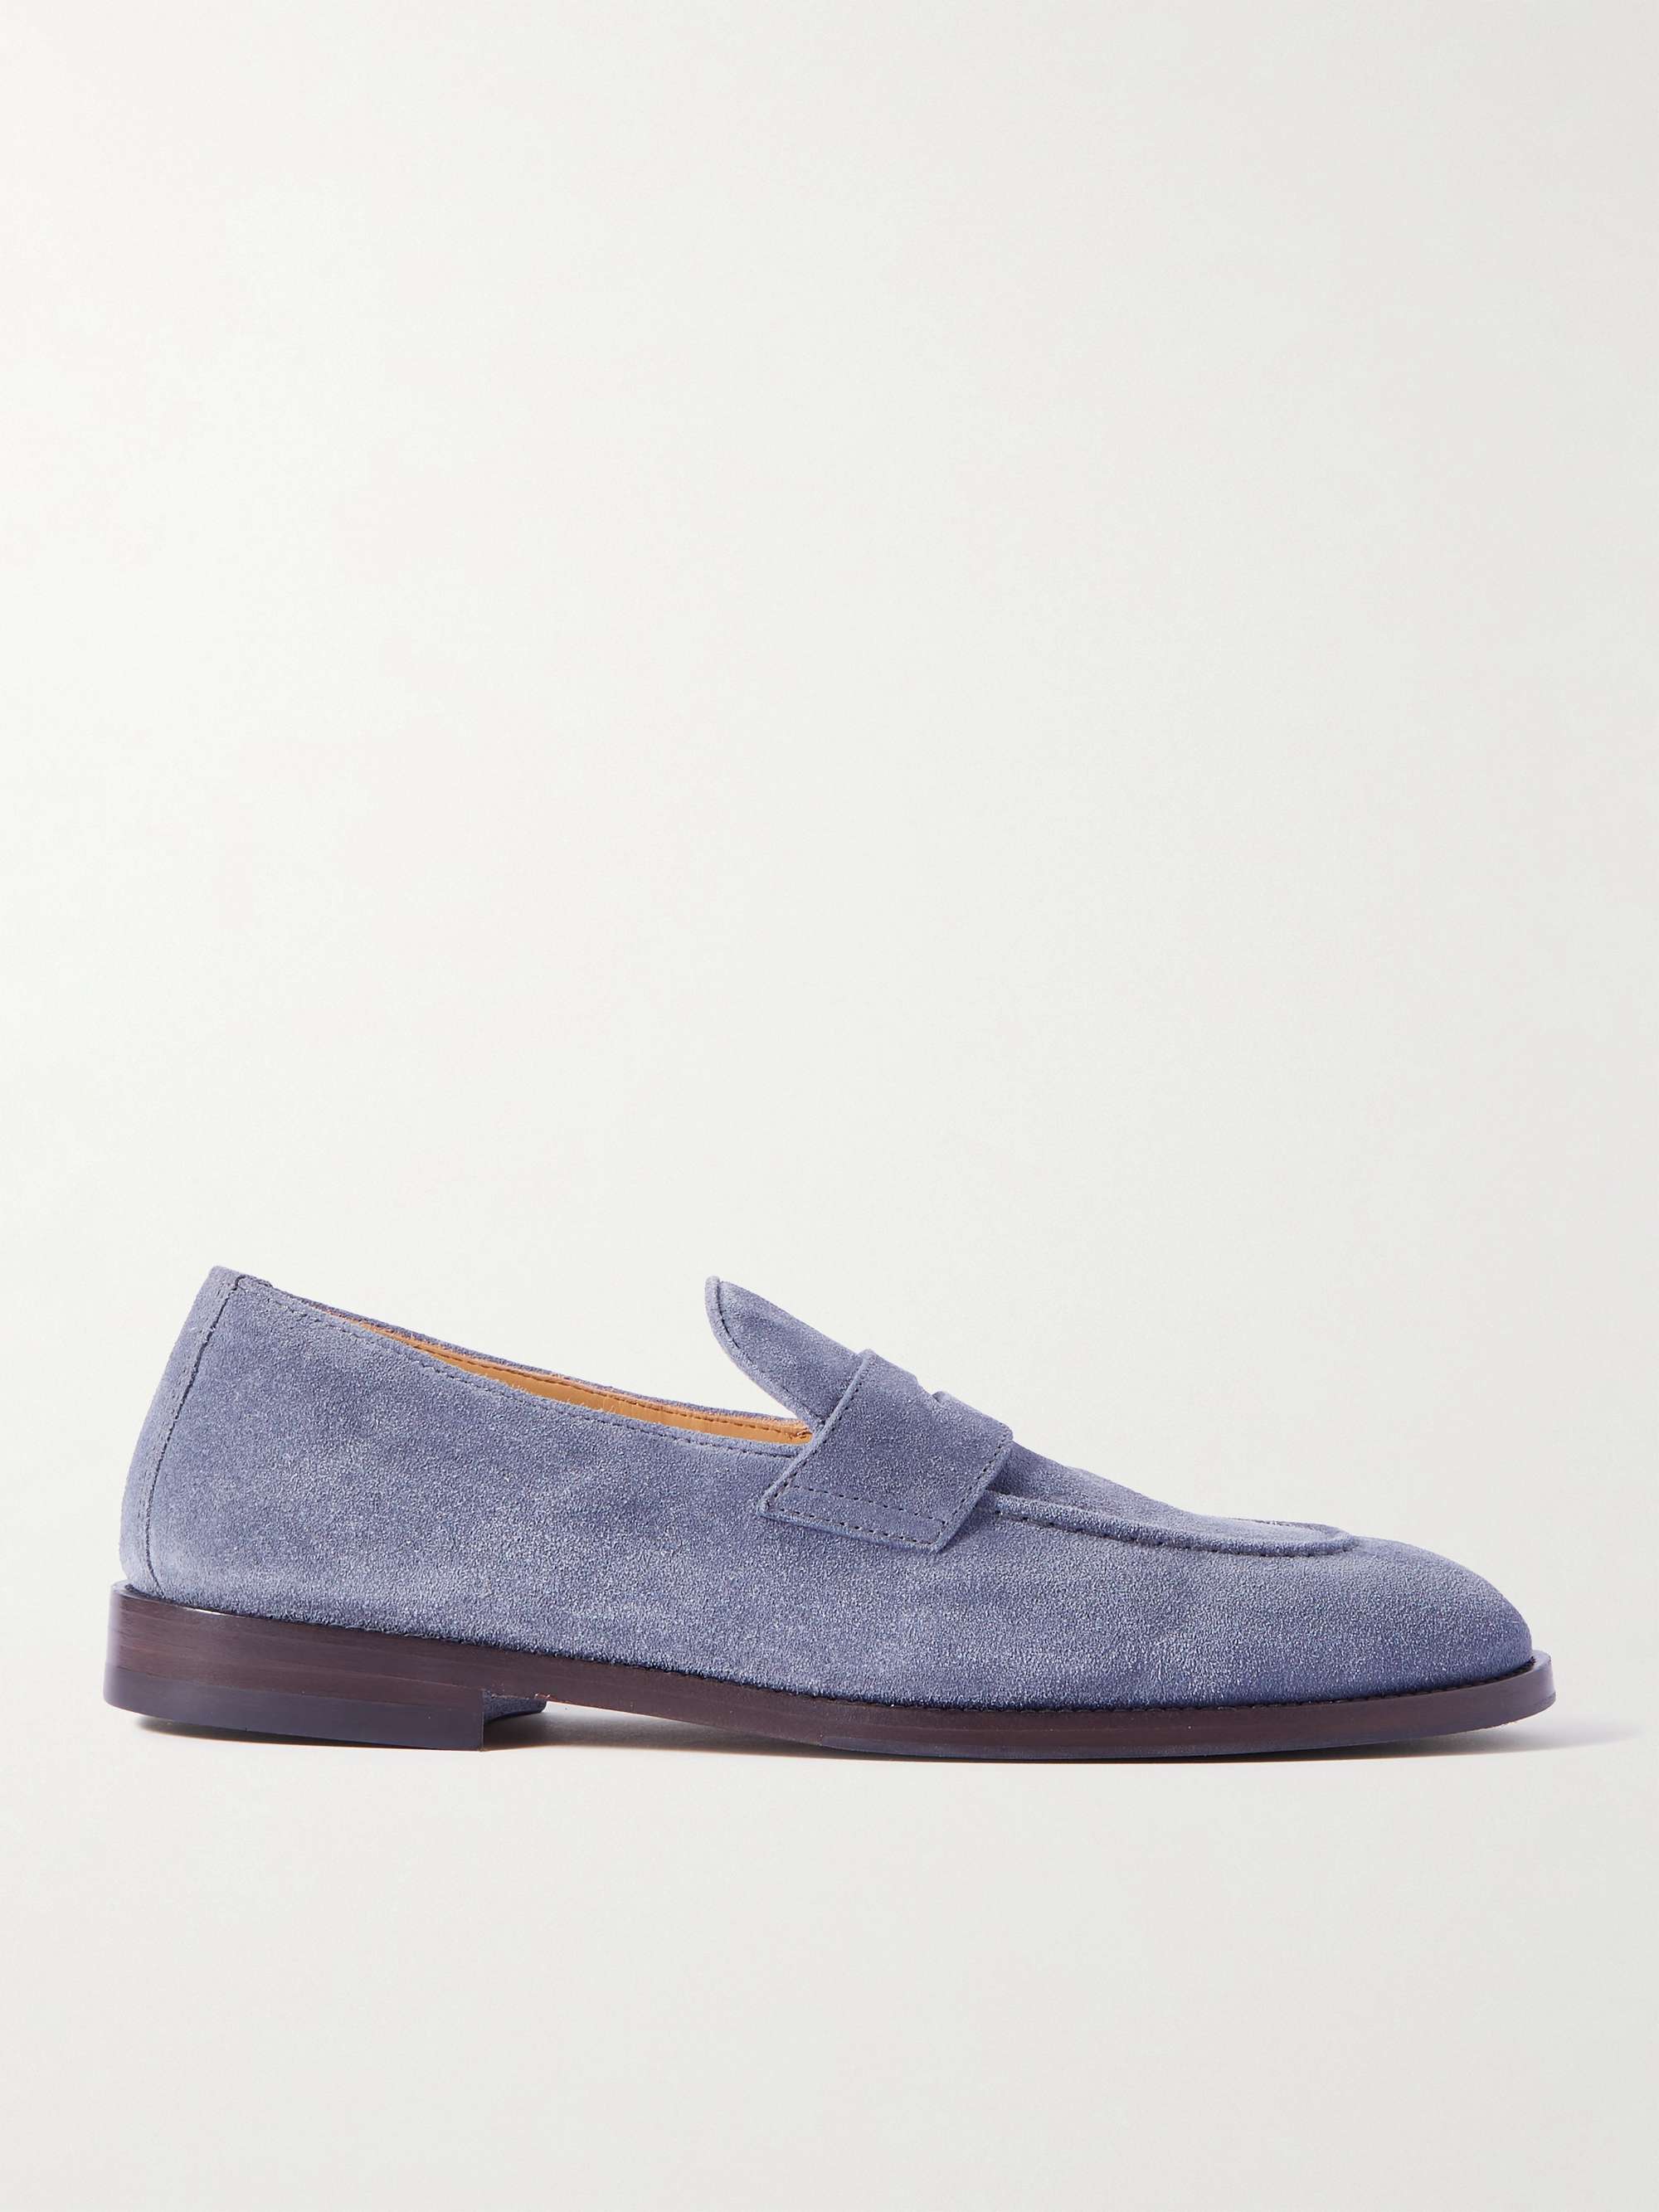 BRUNELLO CUCINELLI Flex Leather-Trimmed Suede Penny Loafers